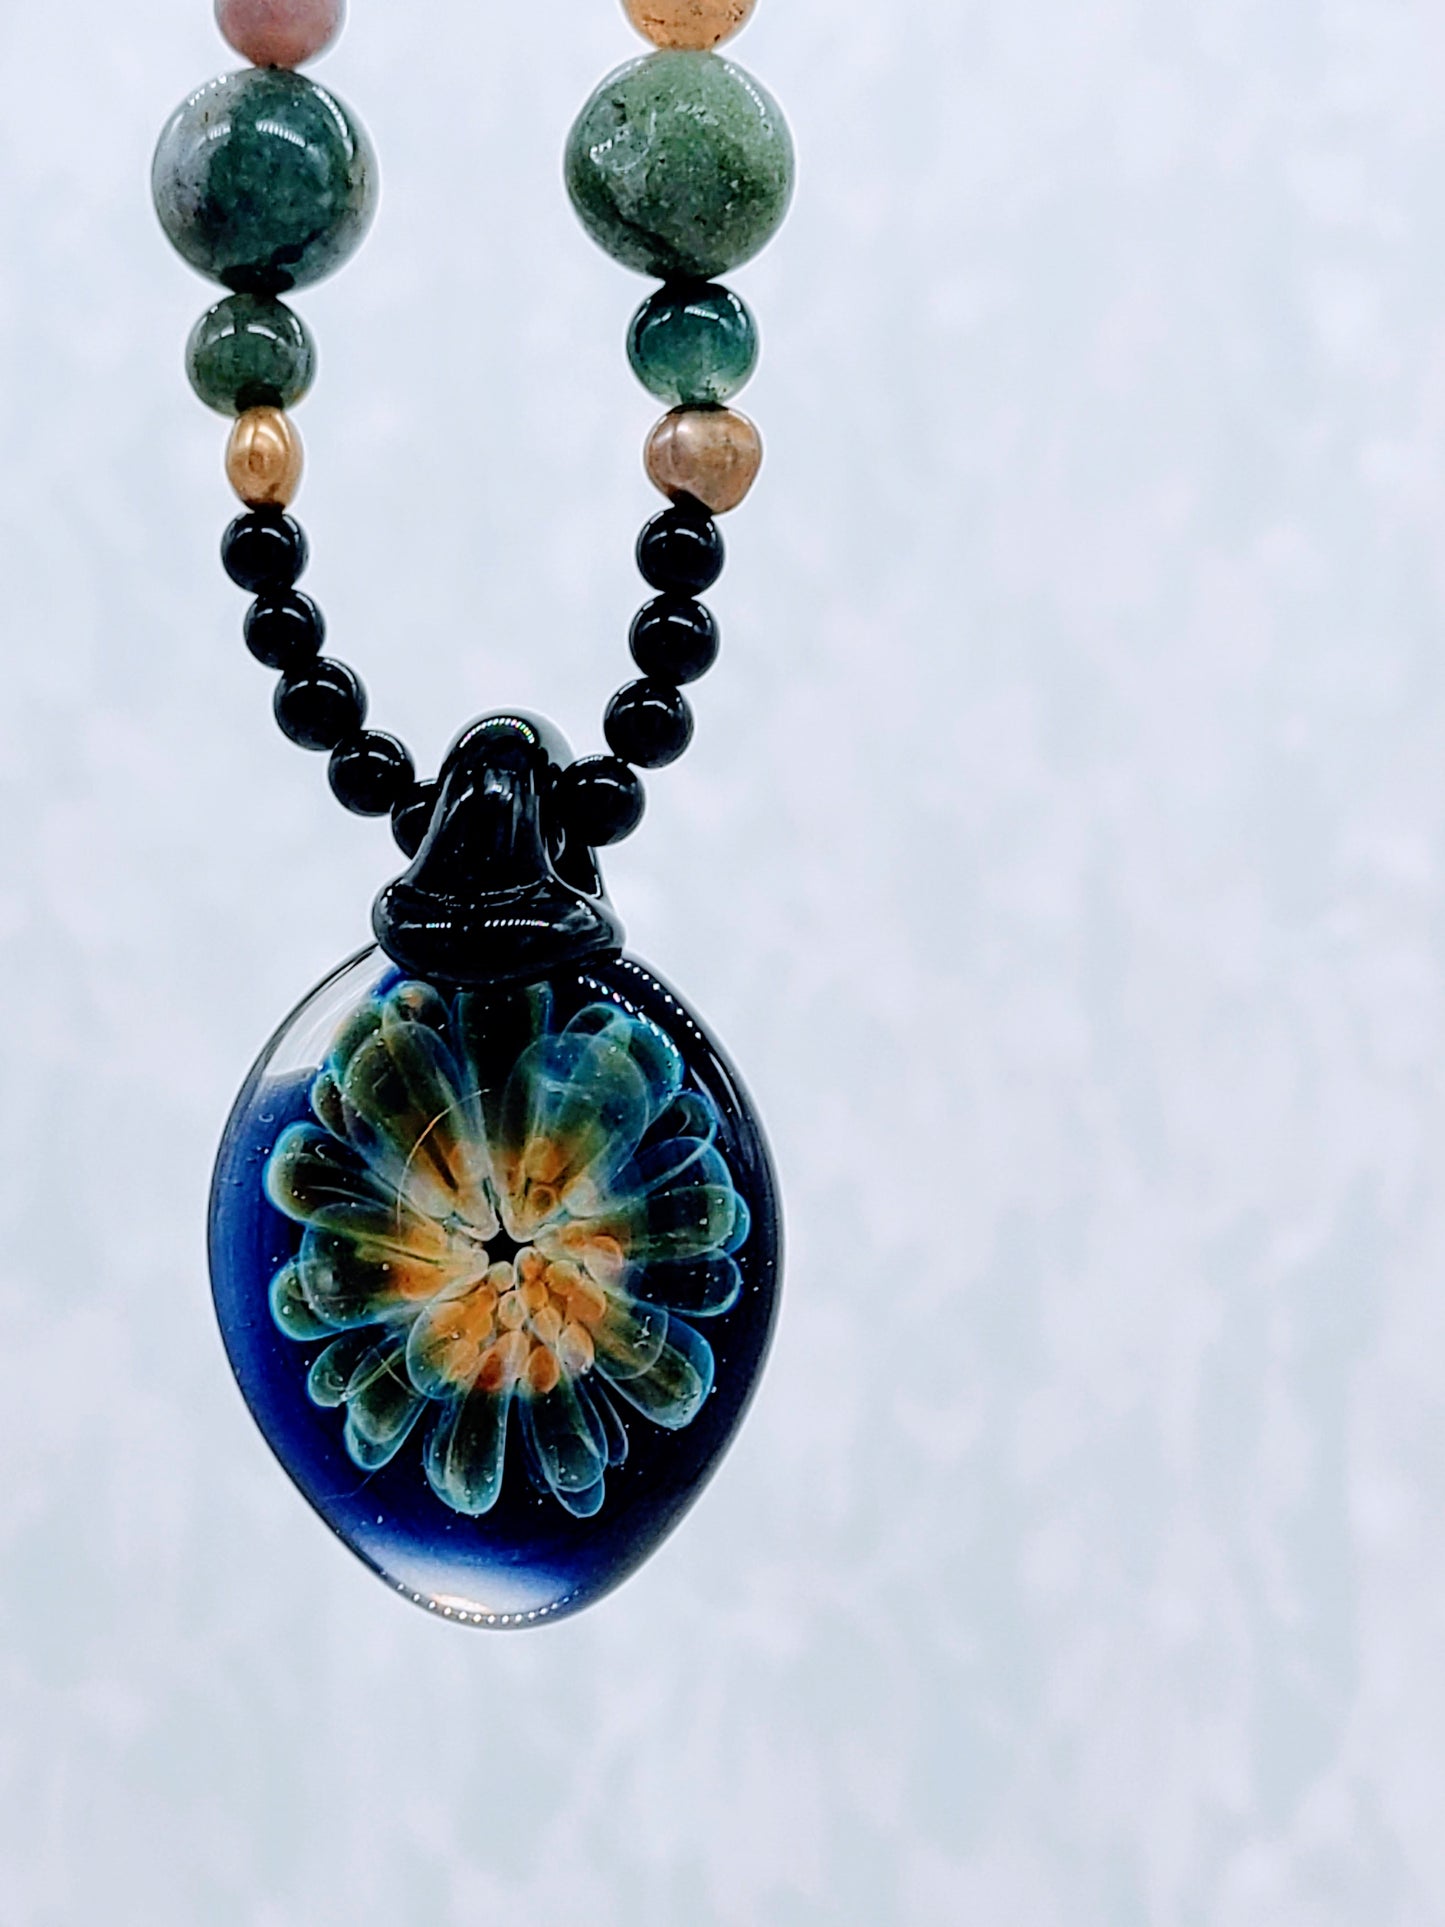 Agate Necklace with Blown Glass Lampwork OOAK Pendant ~ Handmade ~ Unique Jewelry ~ Earth Tones